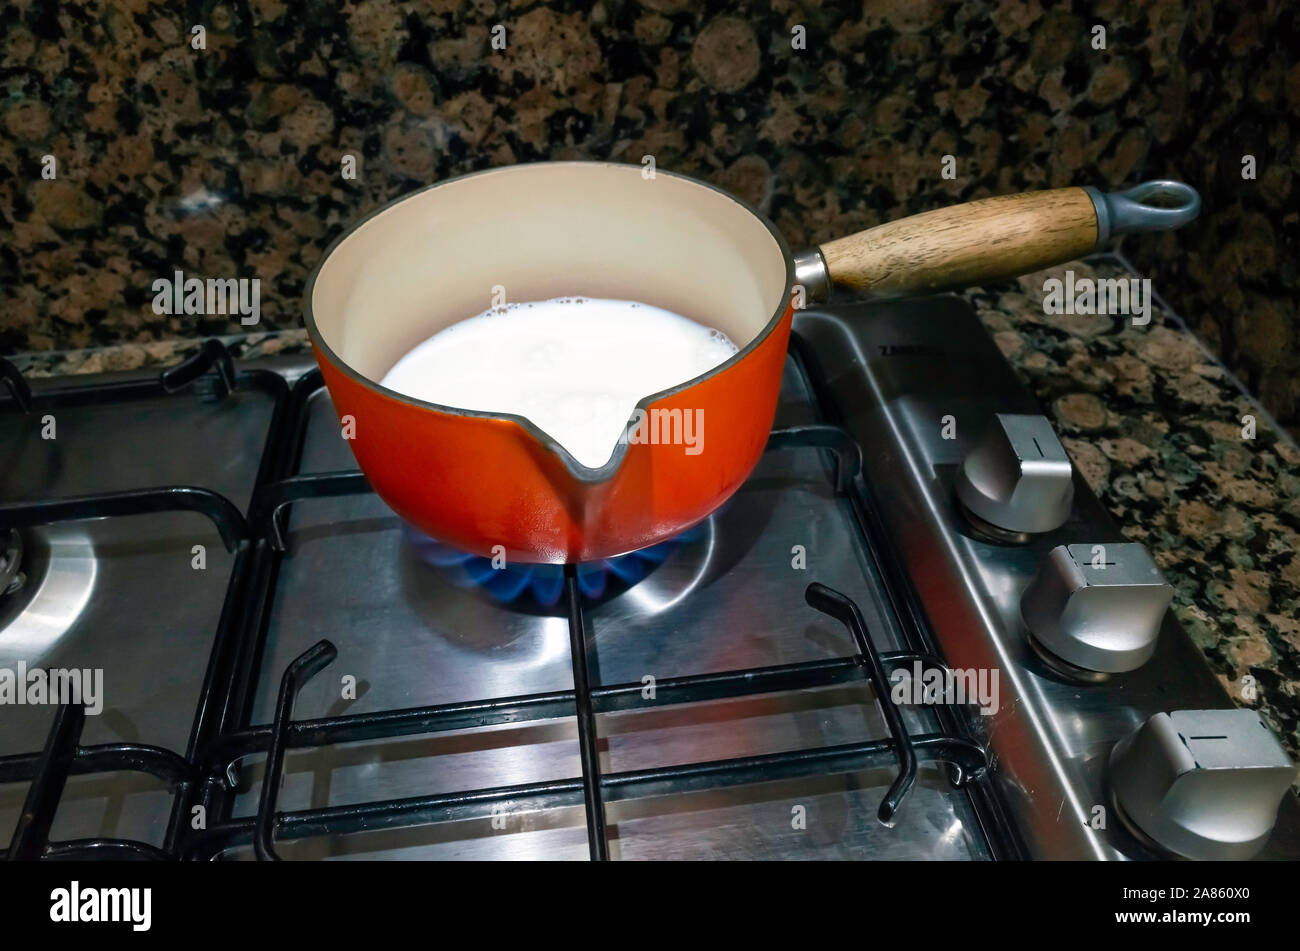 https://c8.alamy.com/comp/2A860X0/a-red-enammeled-saucepan-heating-milk-on-a-gas-stove-with-a-granite-splash-panel-2A860X0.jpg